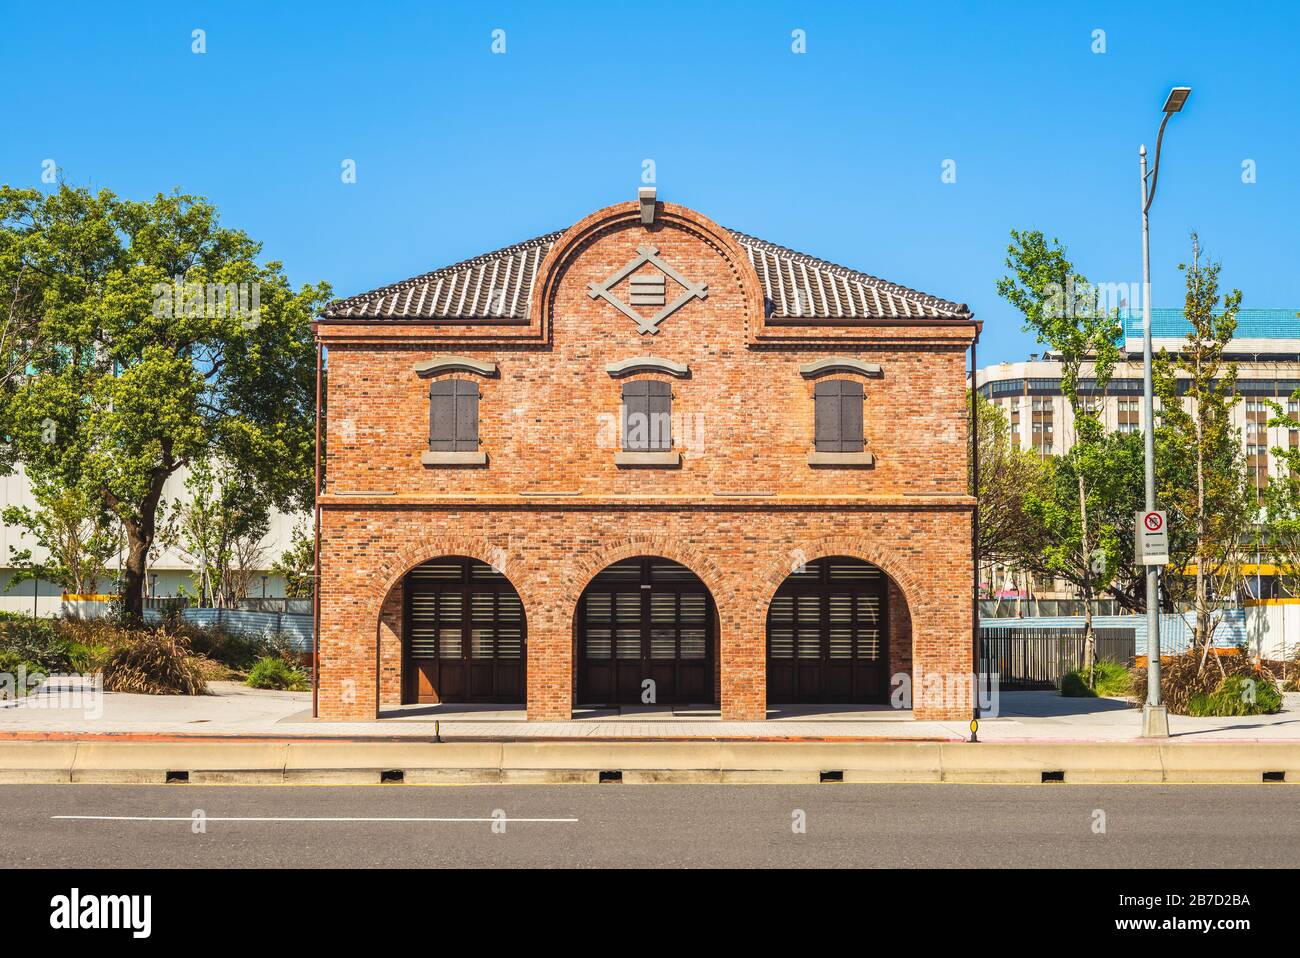 Taipei, Taiwan - March 1, 2020: Mitsui Warehouse, built by Mitsui & Co., Ltd. in 1914 for warehouse and transformed into a memory warehouse opened to Stock Photo